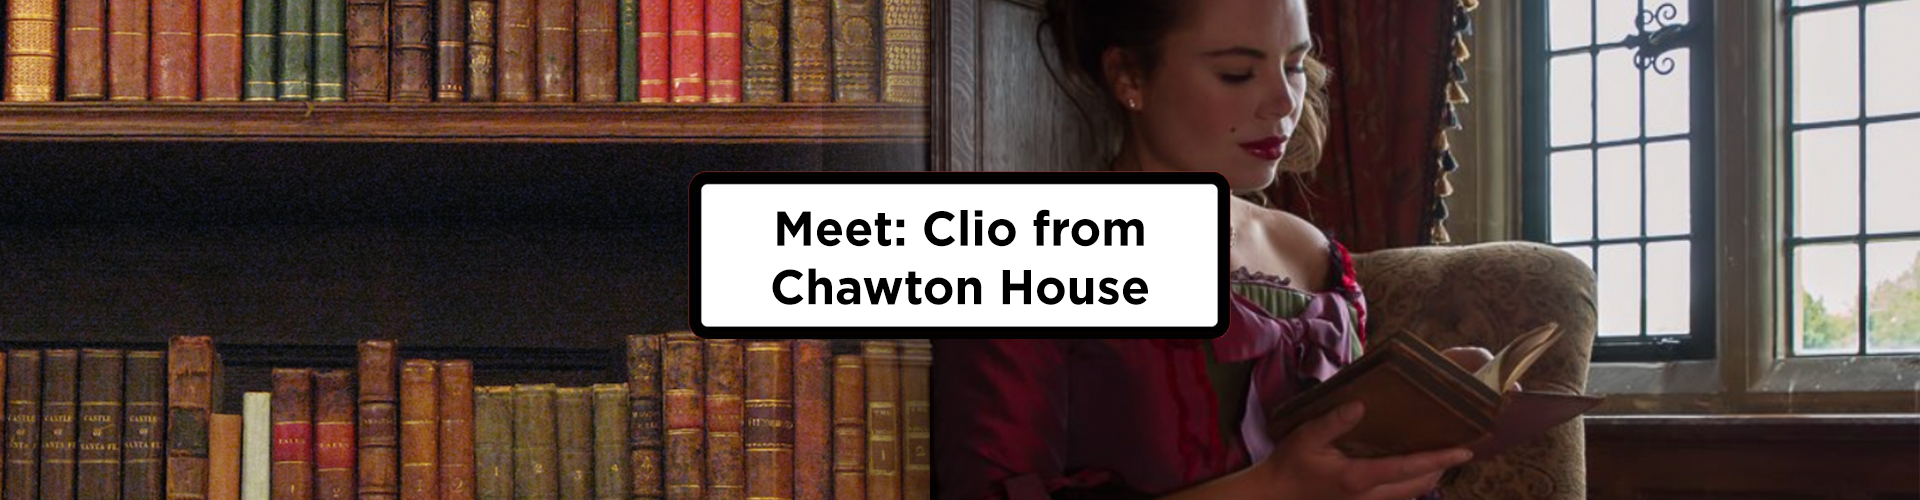 Meet: Clio from Chawton House